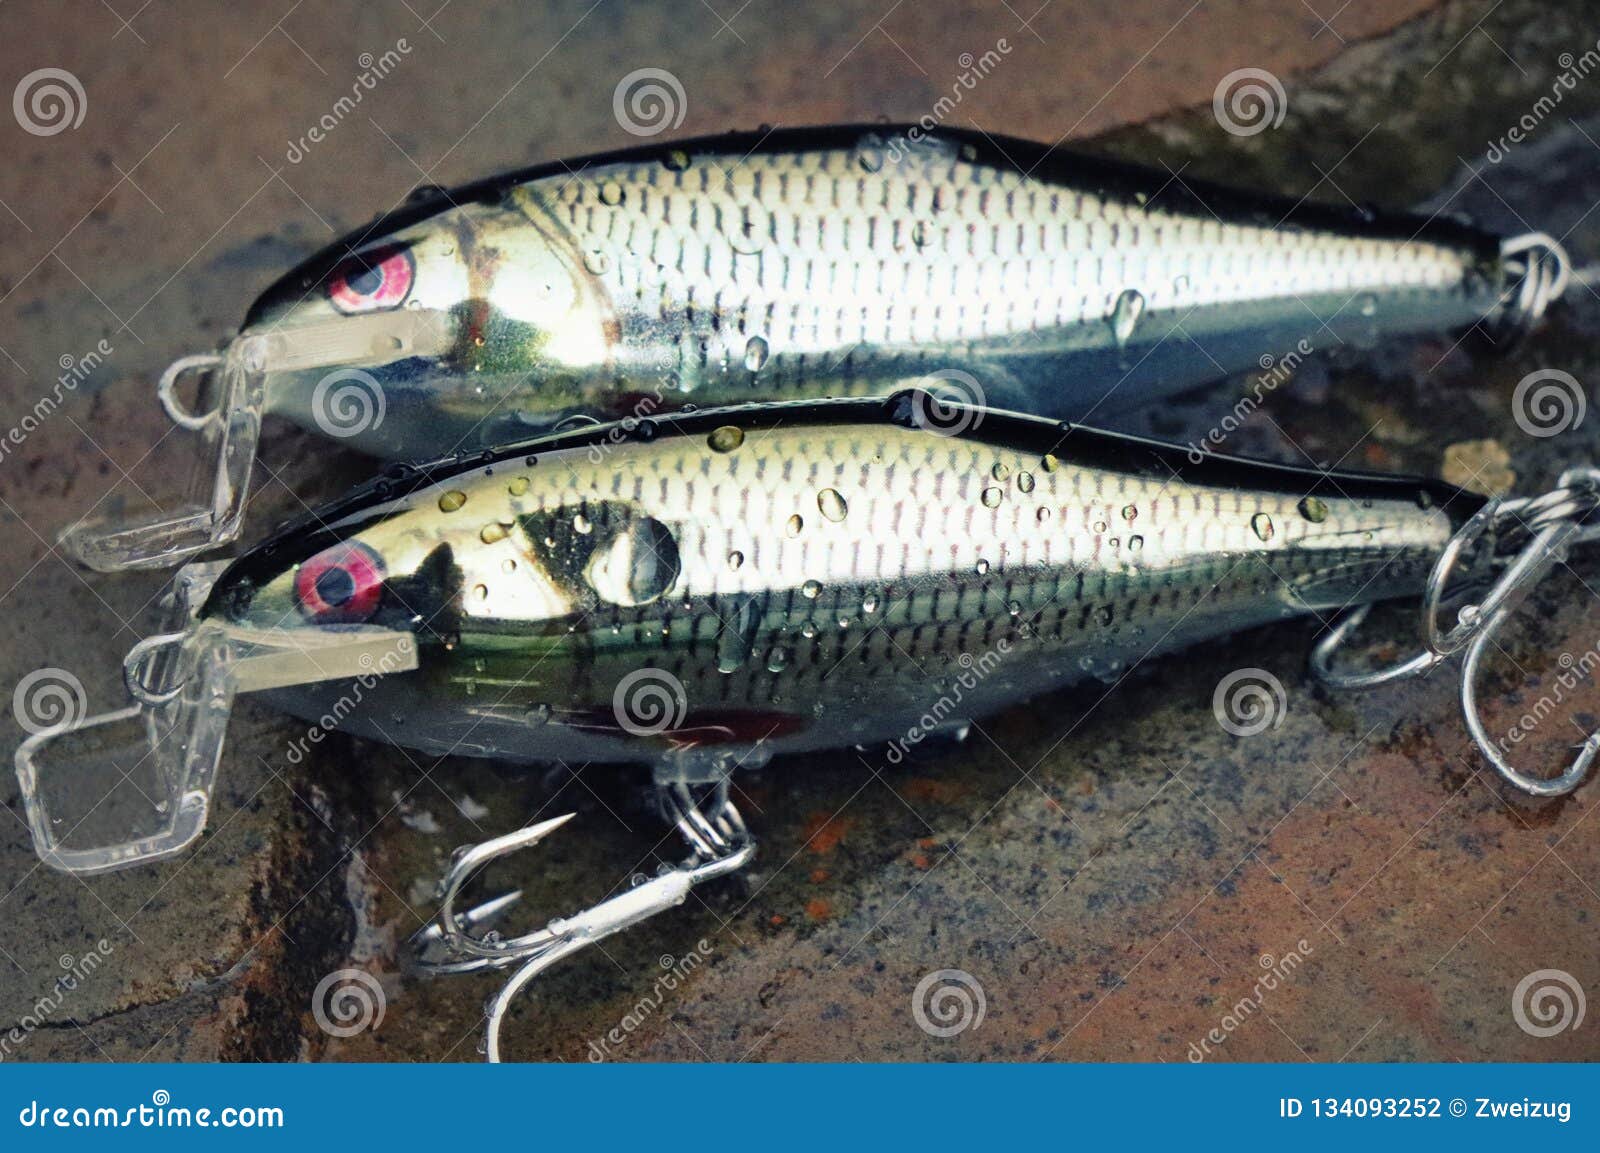 Two Shiny Home-made Fishing Lures Plugs Shads Stock Photo - Image of shad,  rapala: 134093252